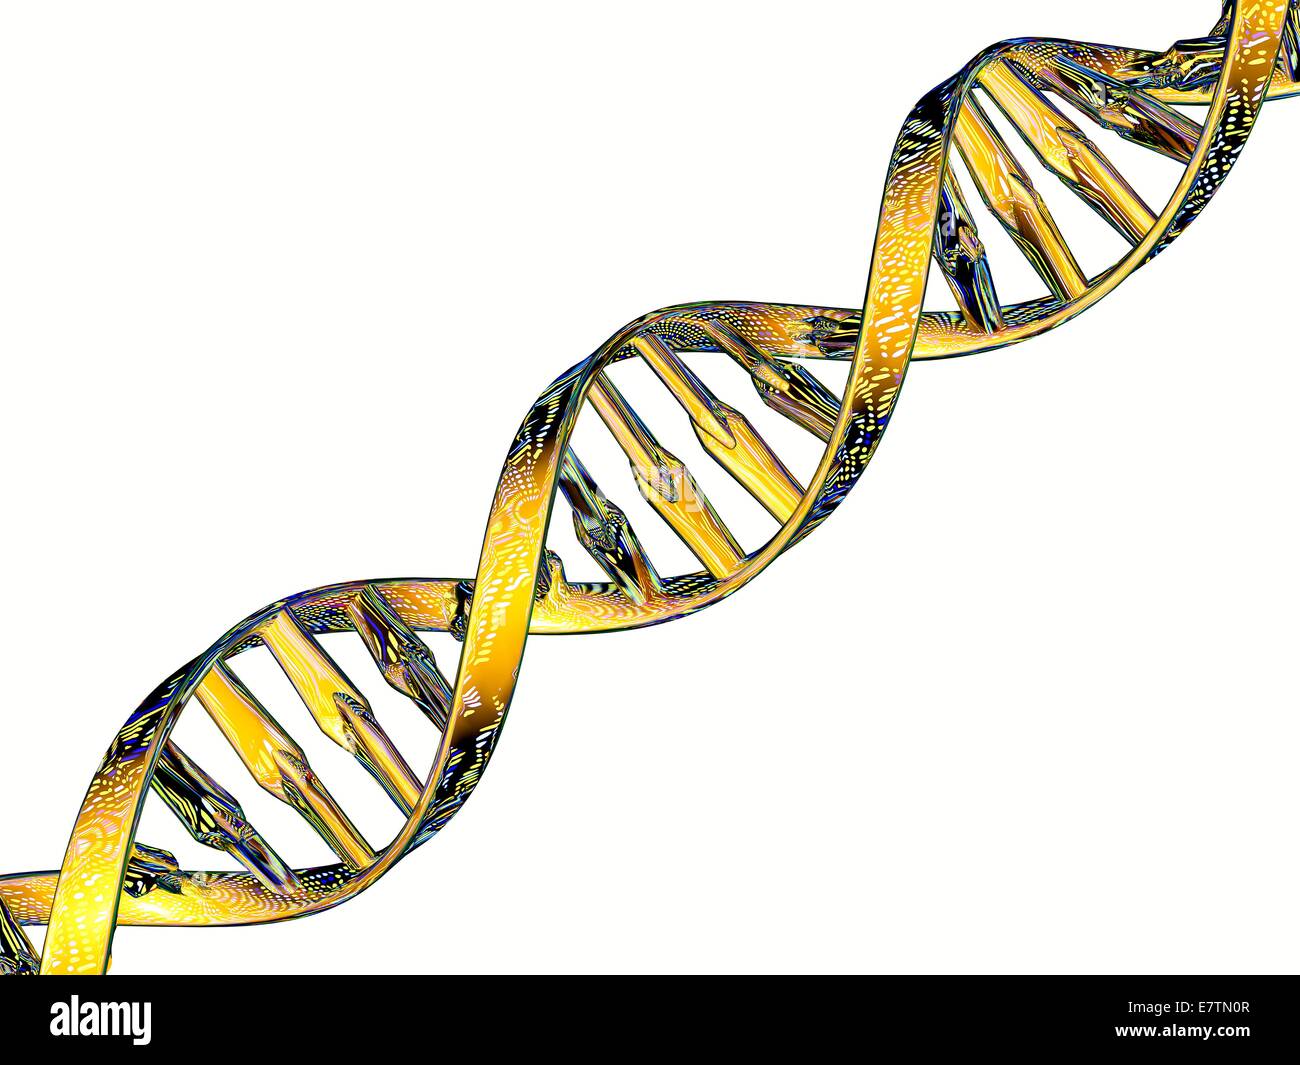 DNA double helix reflecting a DNA microarray. Microarray technology allows biologists to study thousands of genes at once. An array of DNA sequences for a particular set of genes is created, fixed to a supporting slide or chip. Samples of genetic material Stock Photo